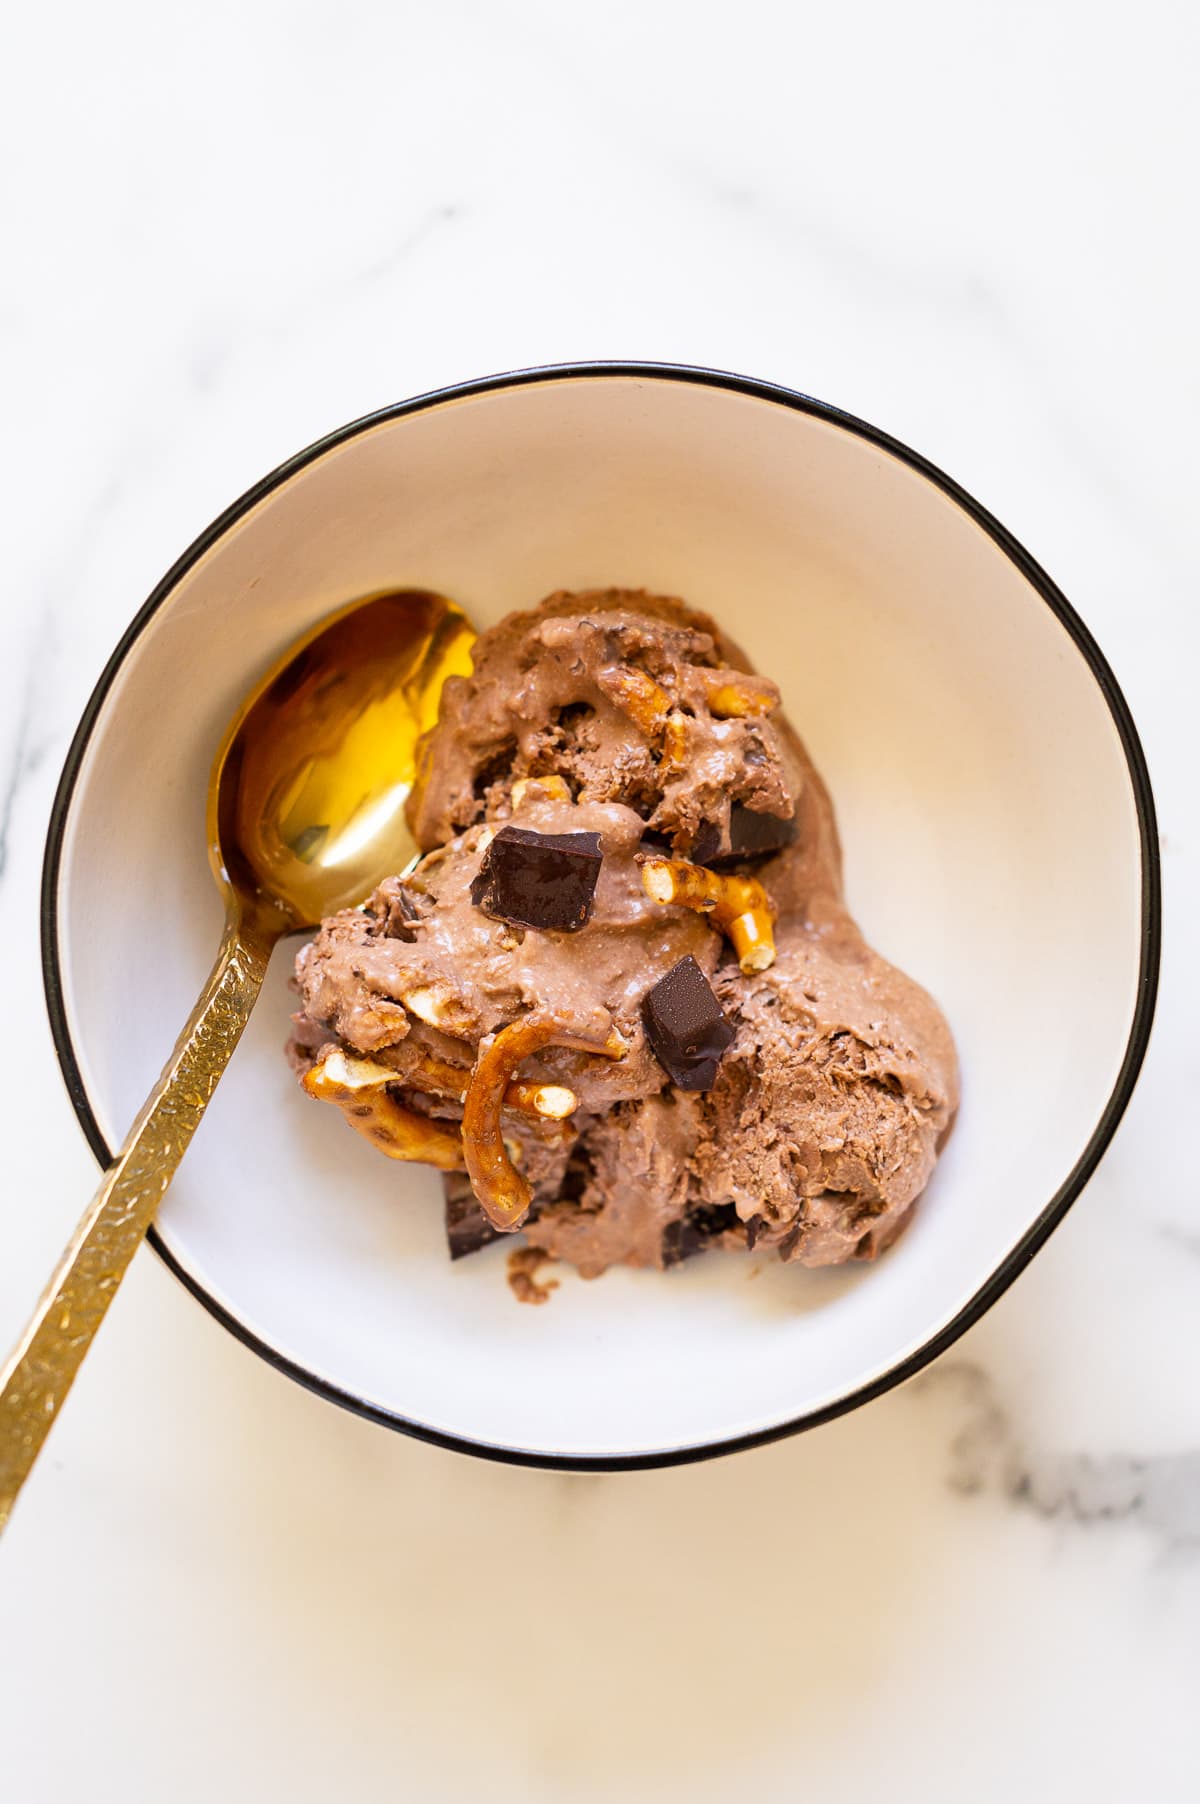 Peanut butter chocolate cottage cheese ice cream in a bowl.